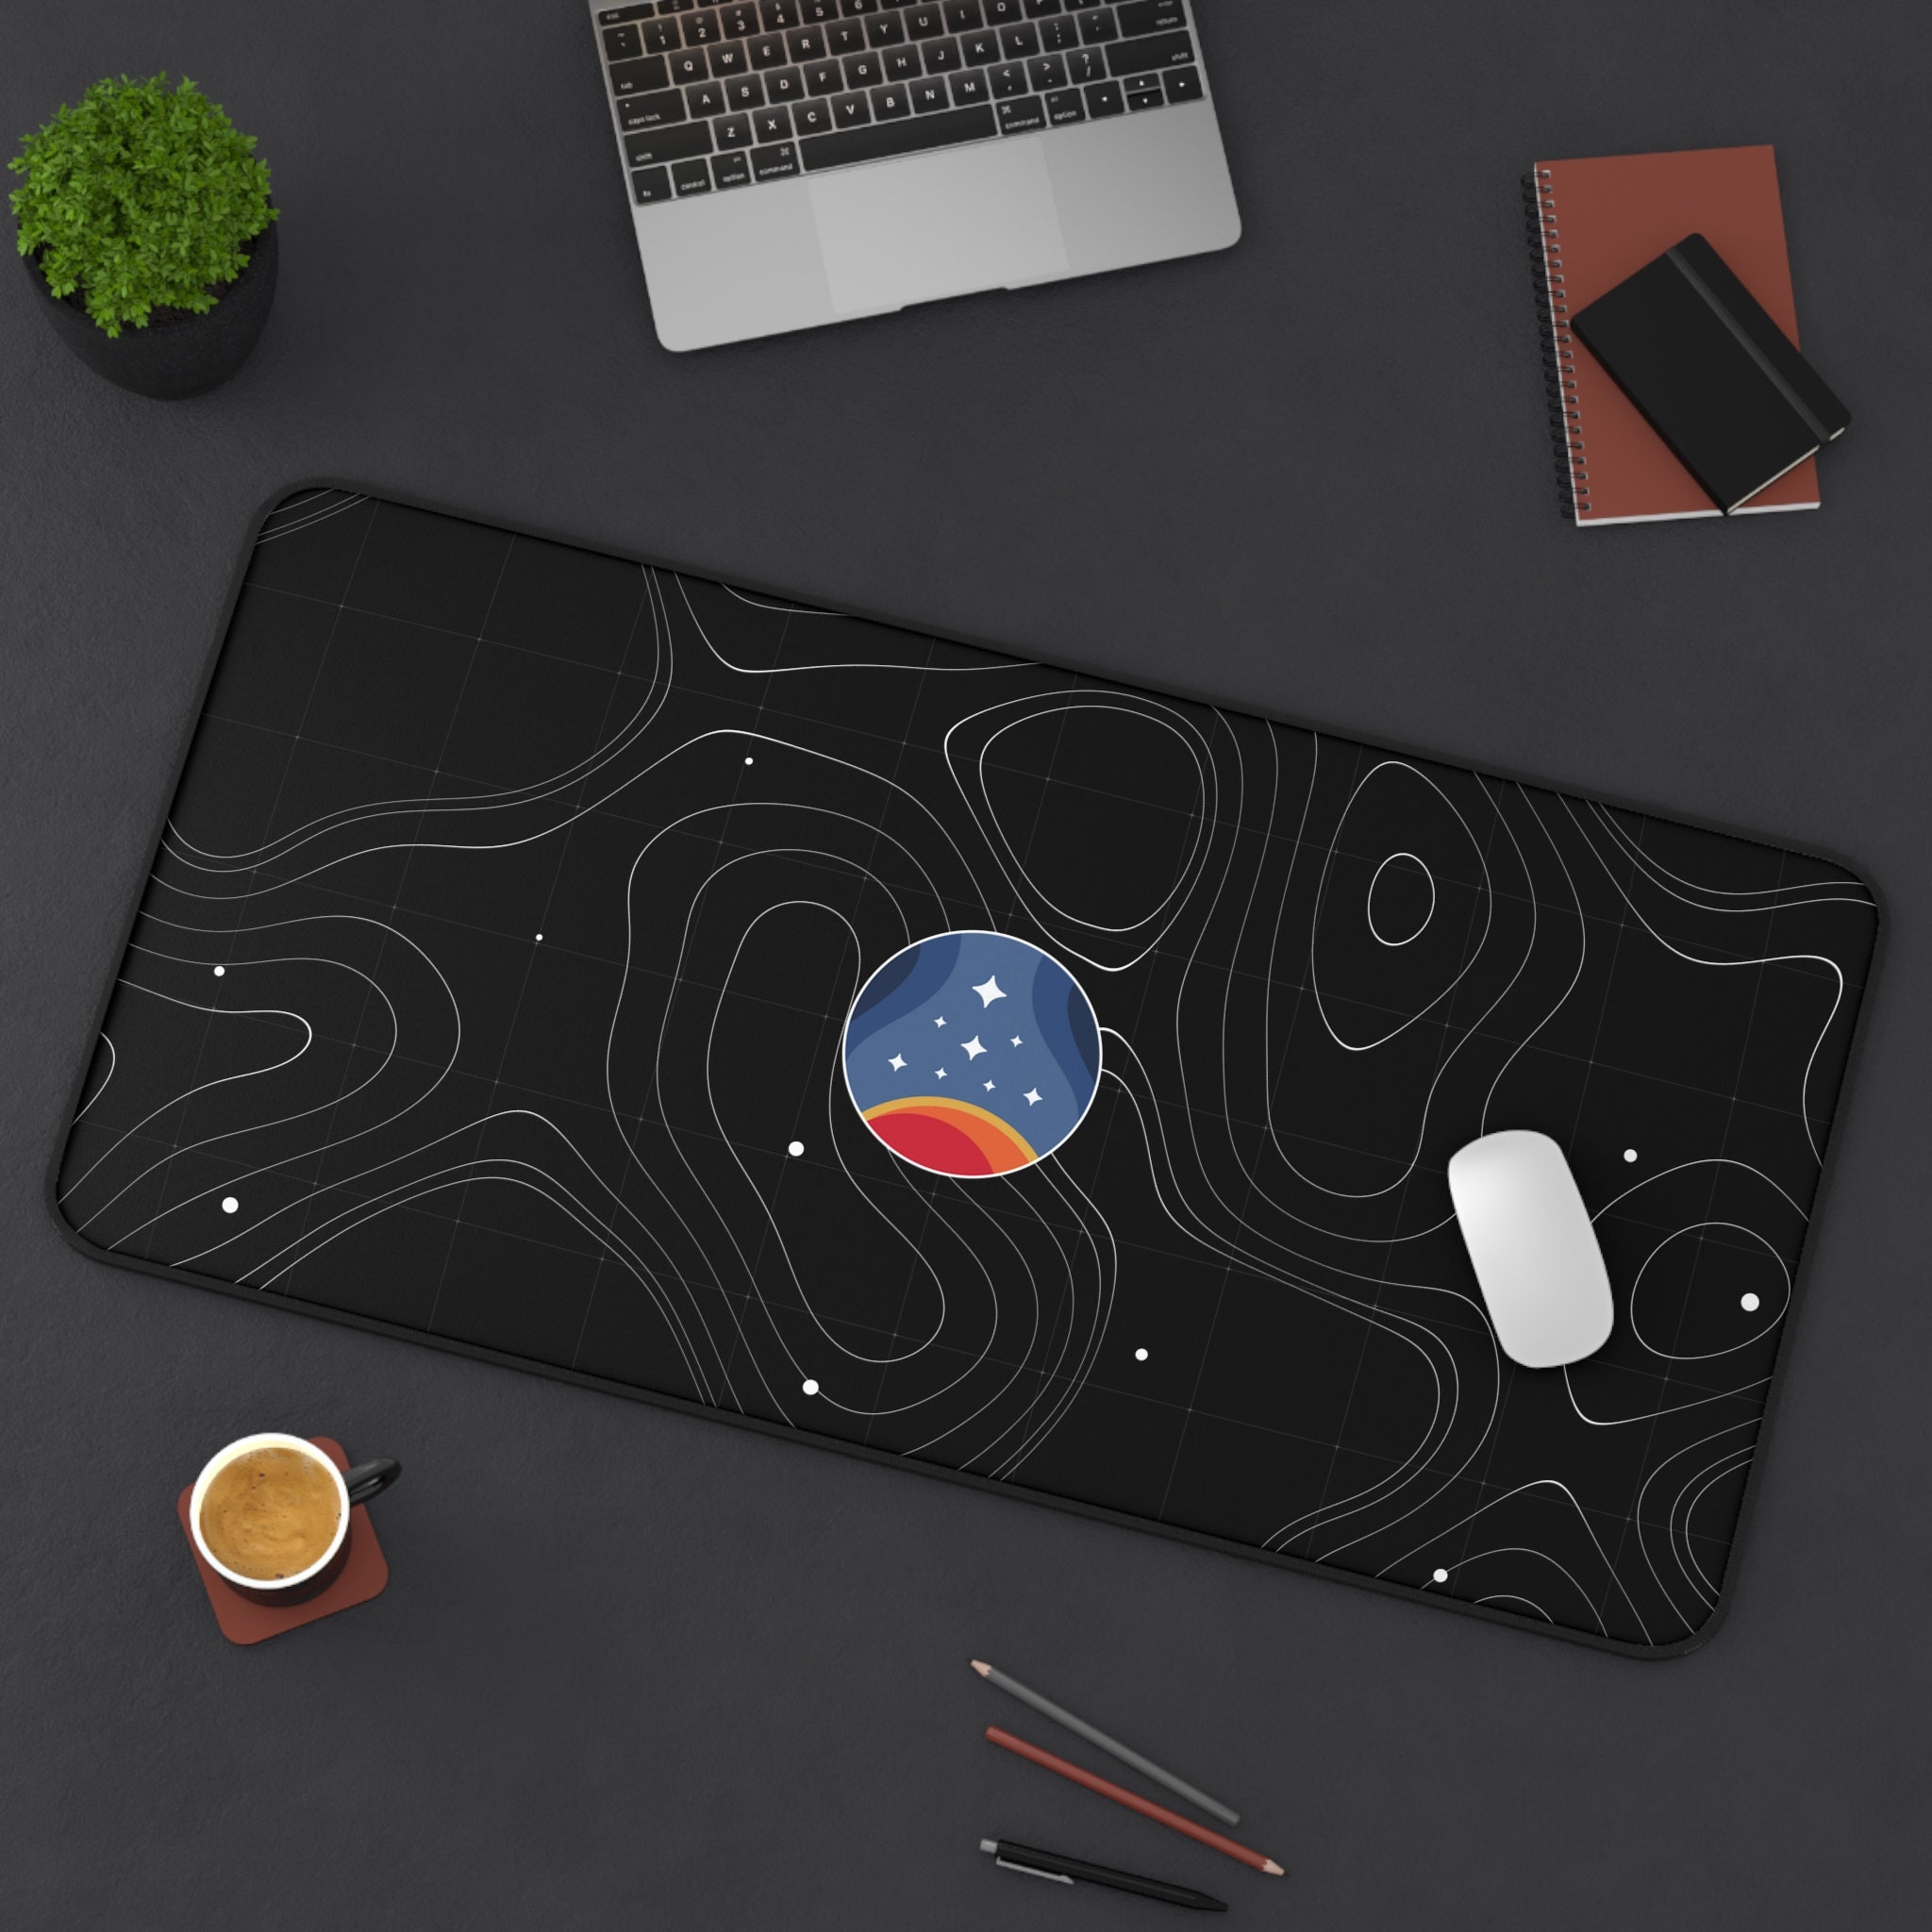  My Chemical Romance Mouse Pad, Large Gaming Mouse Pad, Play  Mat, Computer Mat, Stylish, Waterproof, Anti-Scratch, Non-Slip Rubber Sole,  Durable, Increases Mouse Accuracy, Desk Pad, Multi-functional, Gift, For  Office and Home